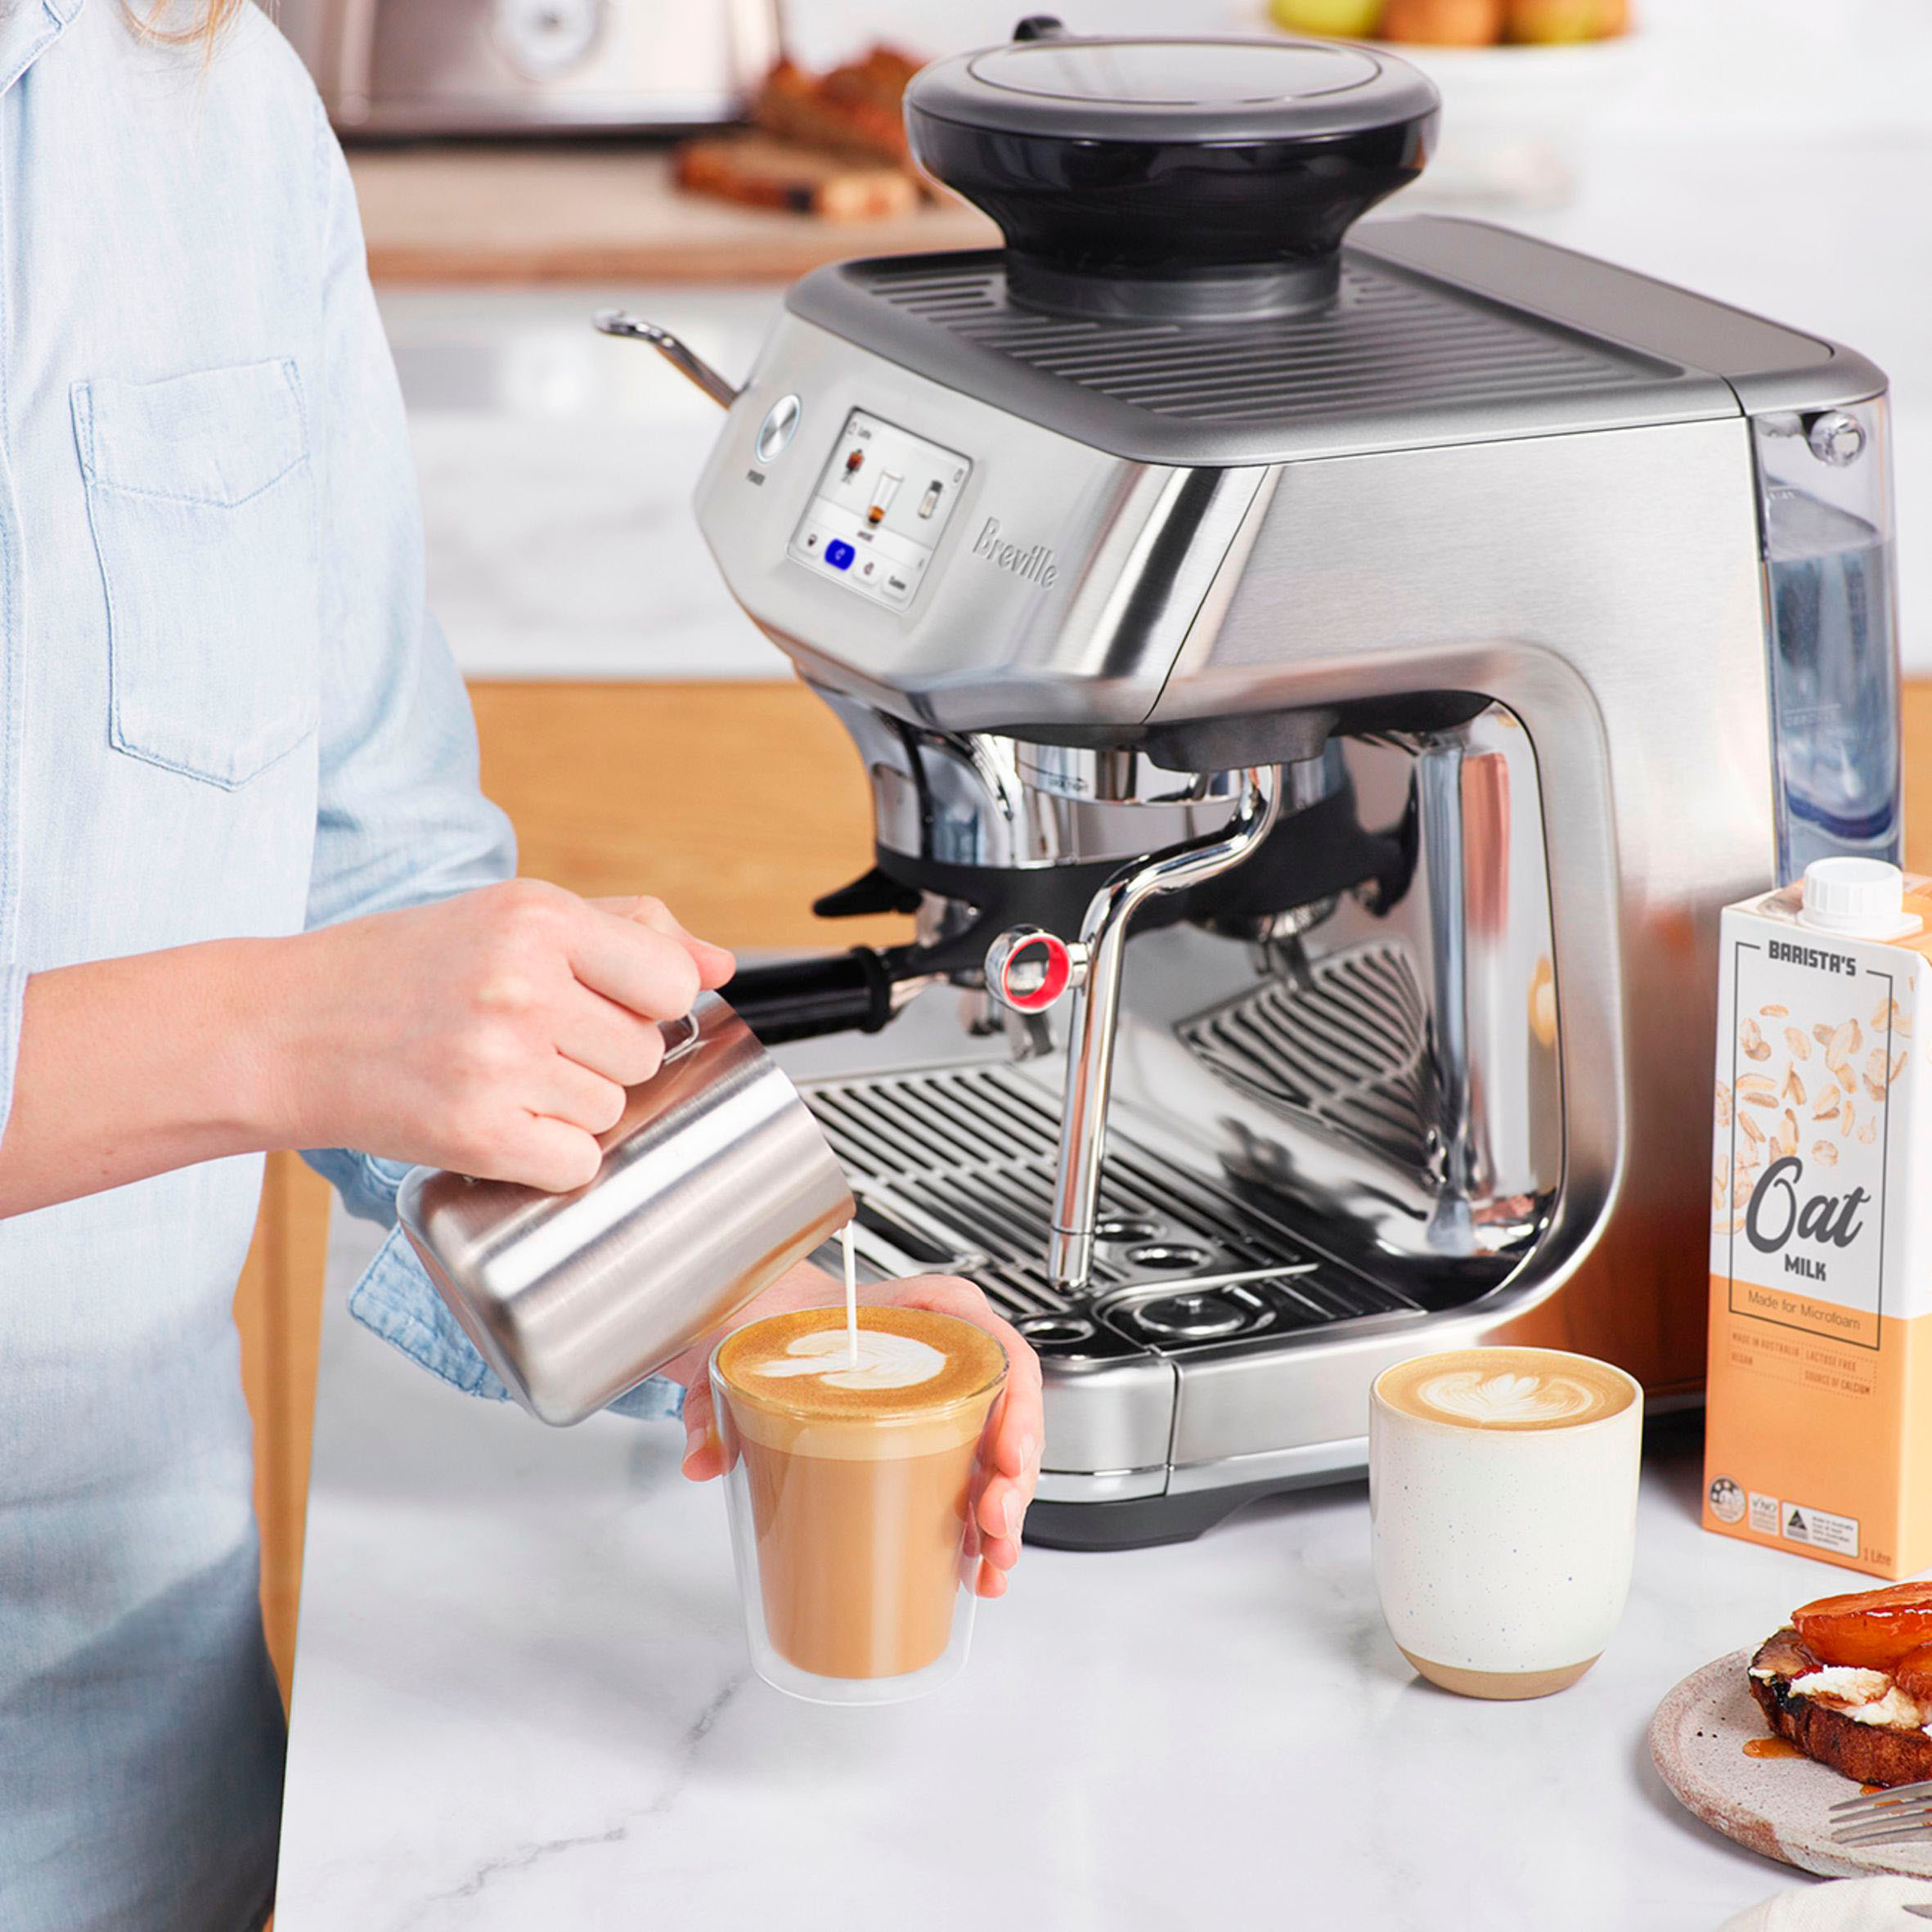 Breville Barista Touch Impress Espresso Machine Brushed Stainless Steel  BES881BSS1BNA1 - Best Buy